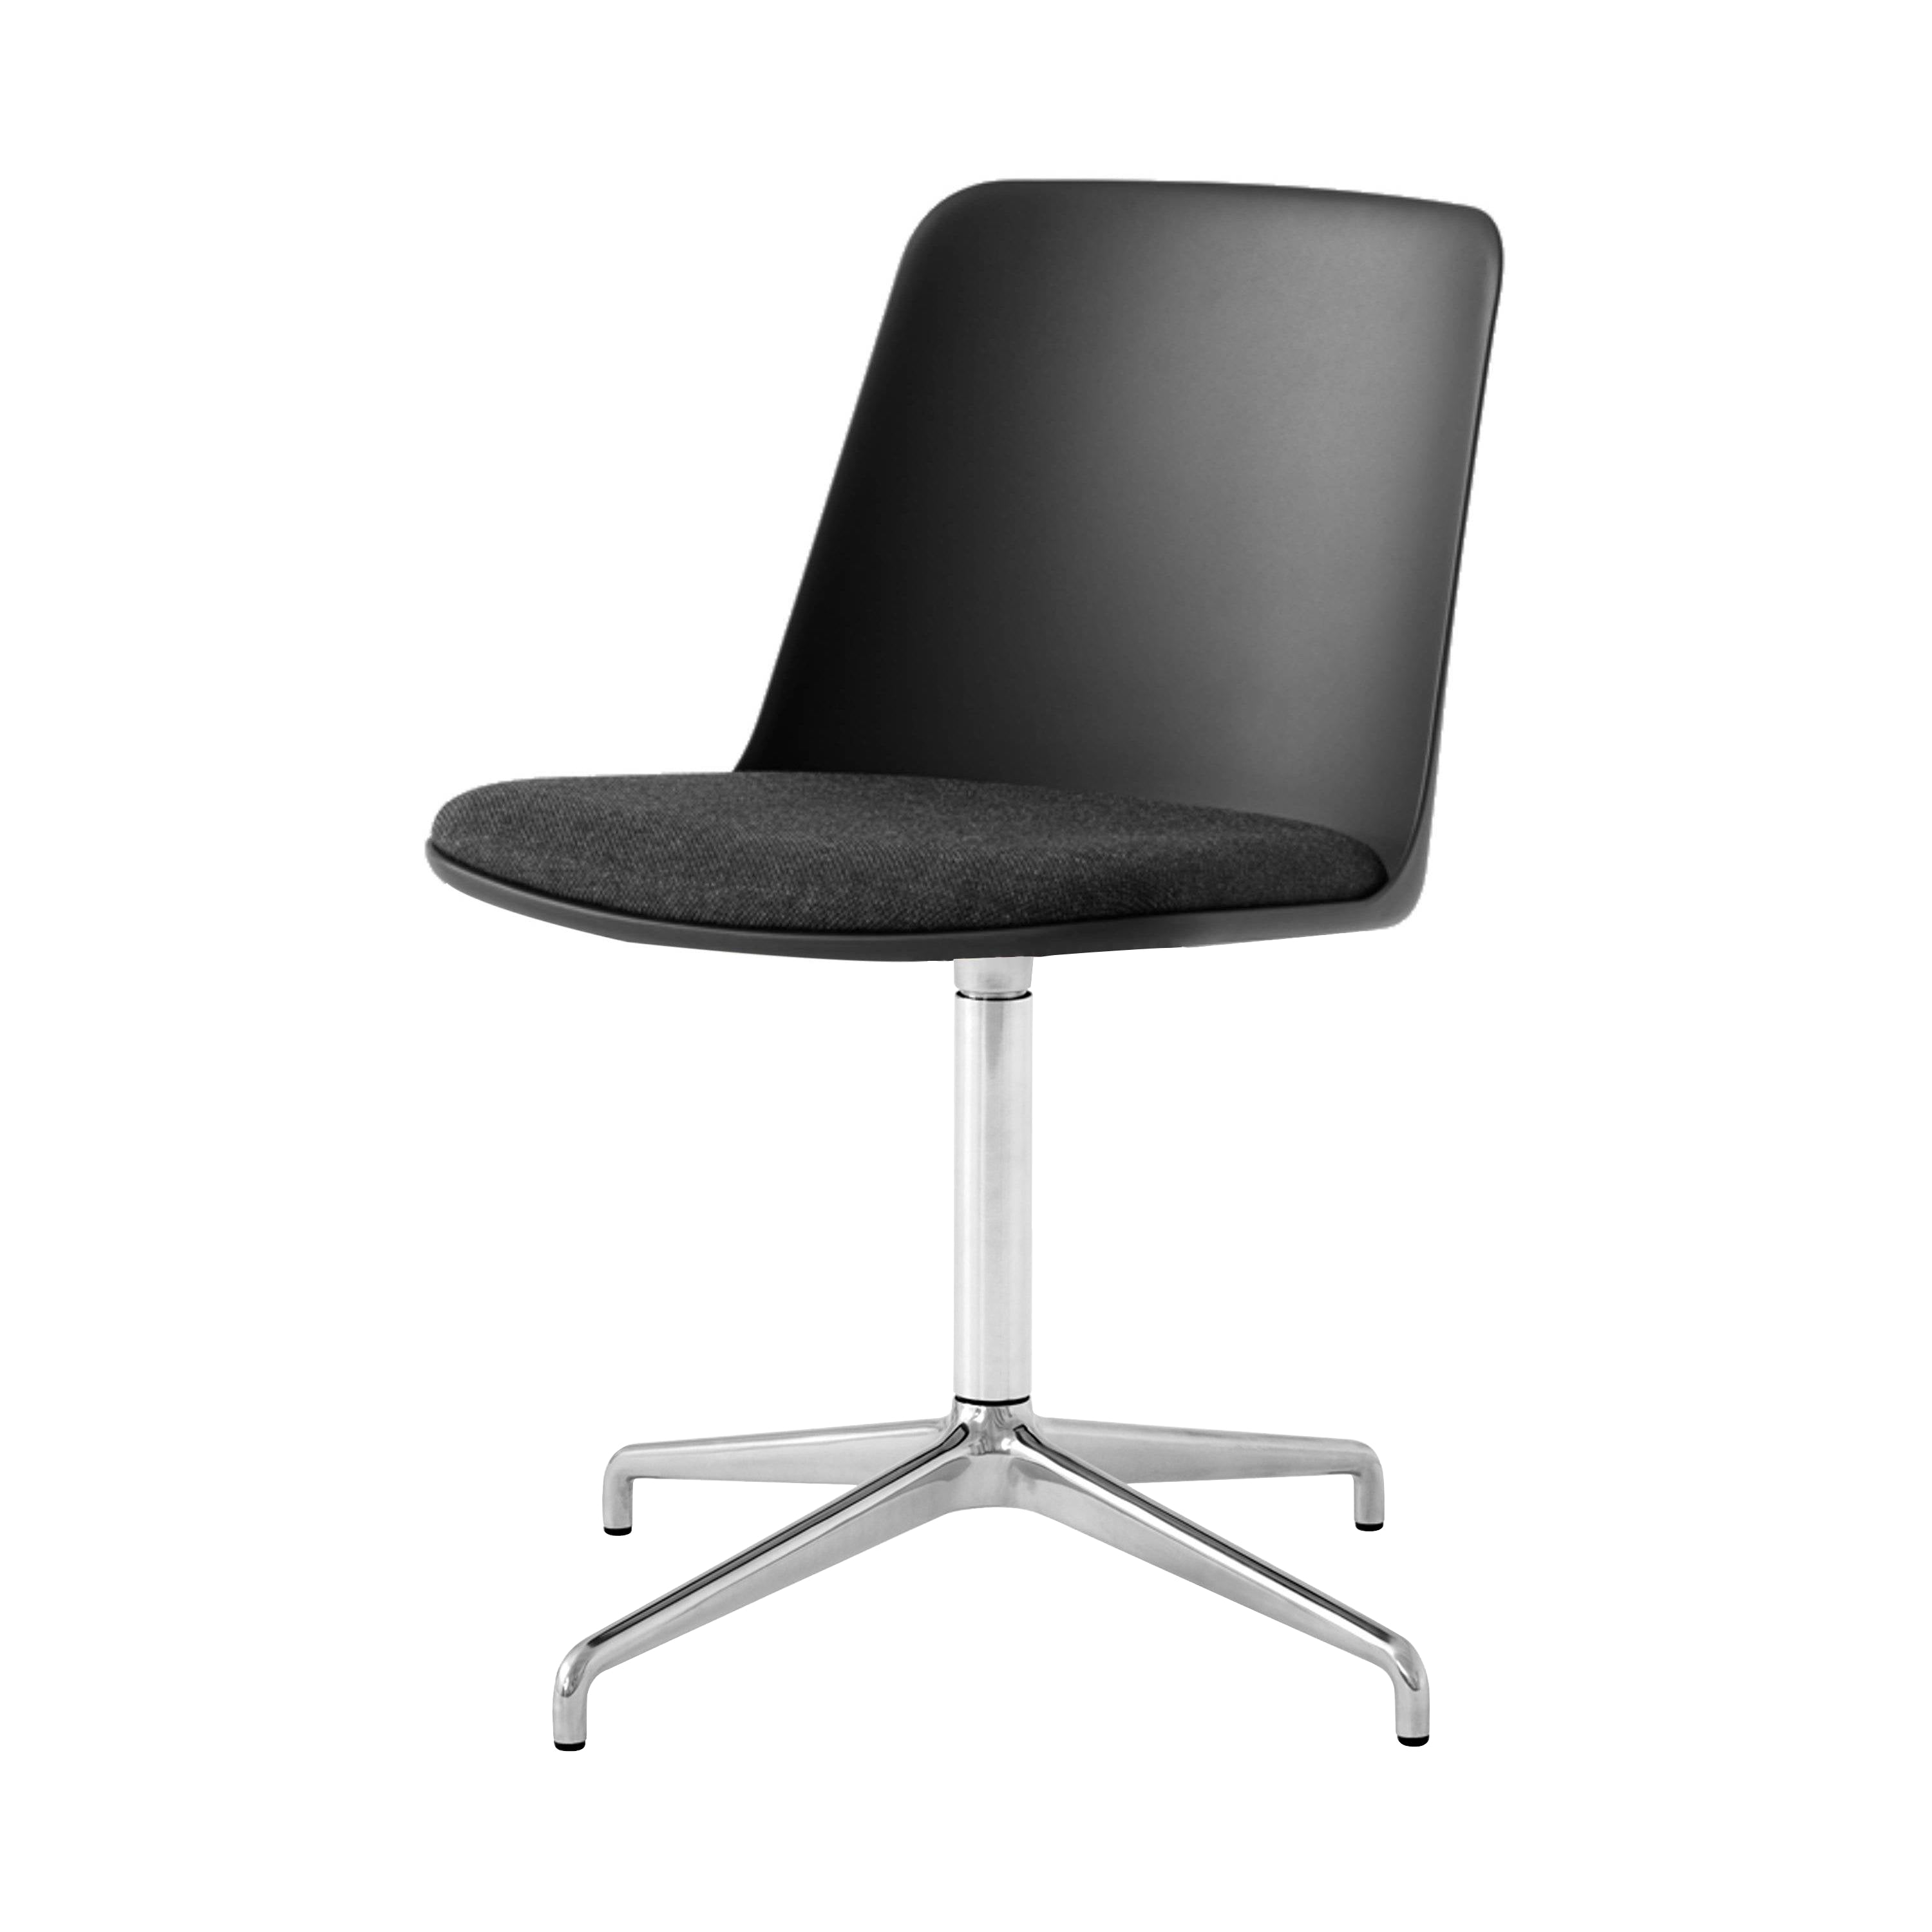 Rely Chair HW12: Polished Aluminum + Black